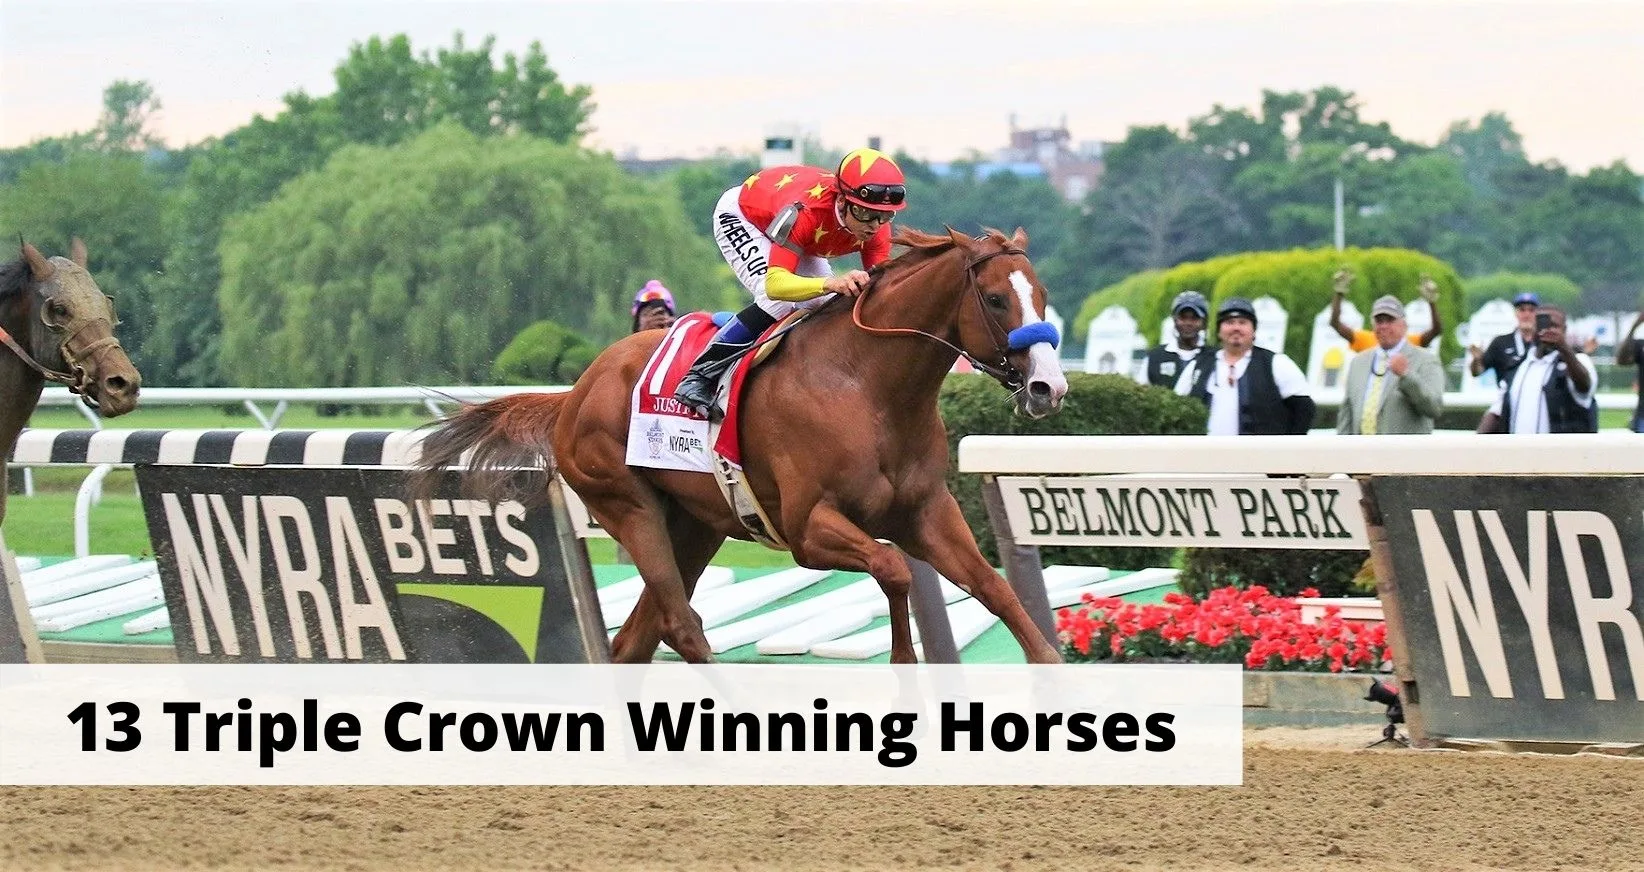 13 Triple Crown Winning Horses Who Made History